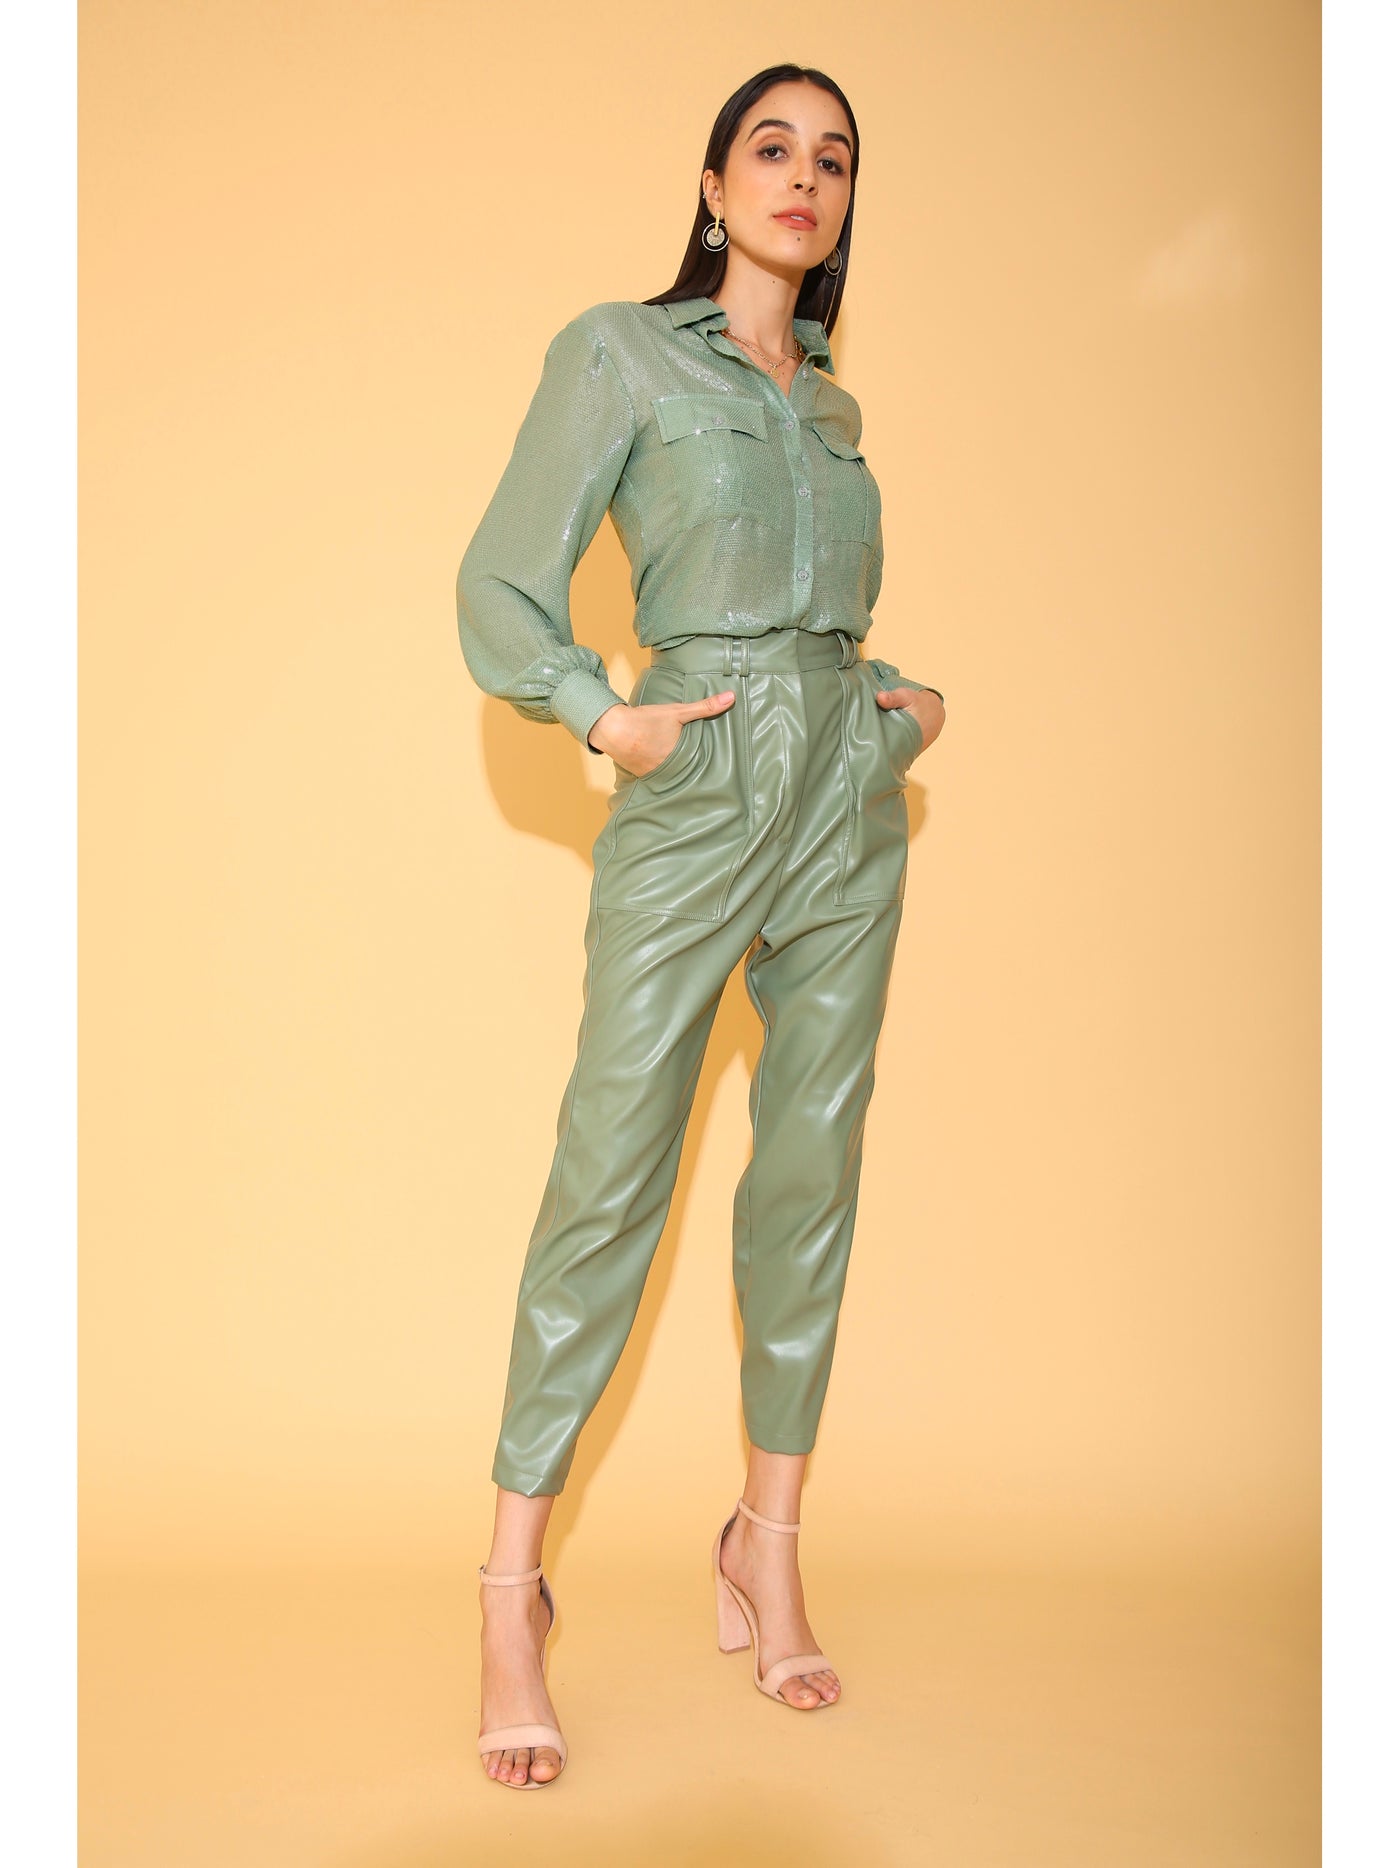 Aqua Sequins and Green Leather Co-ord Set